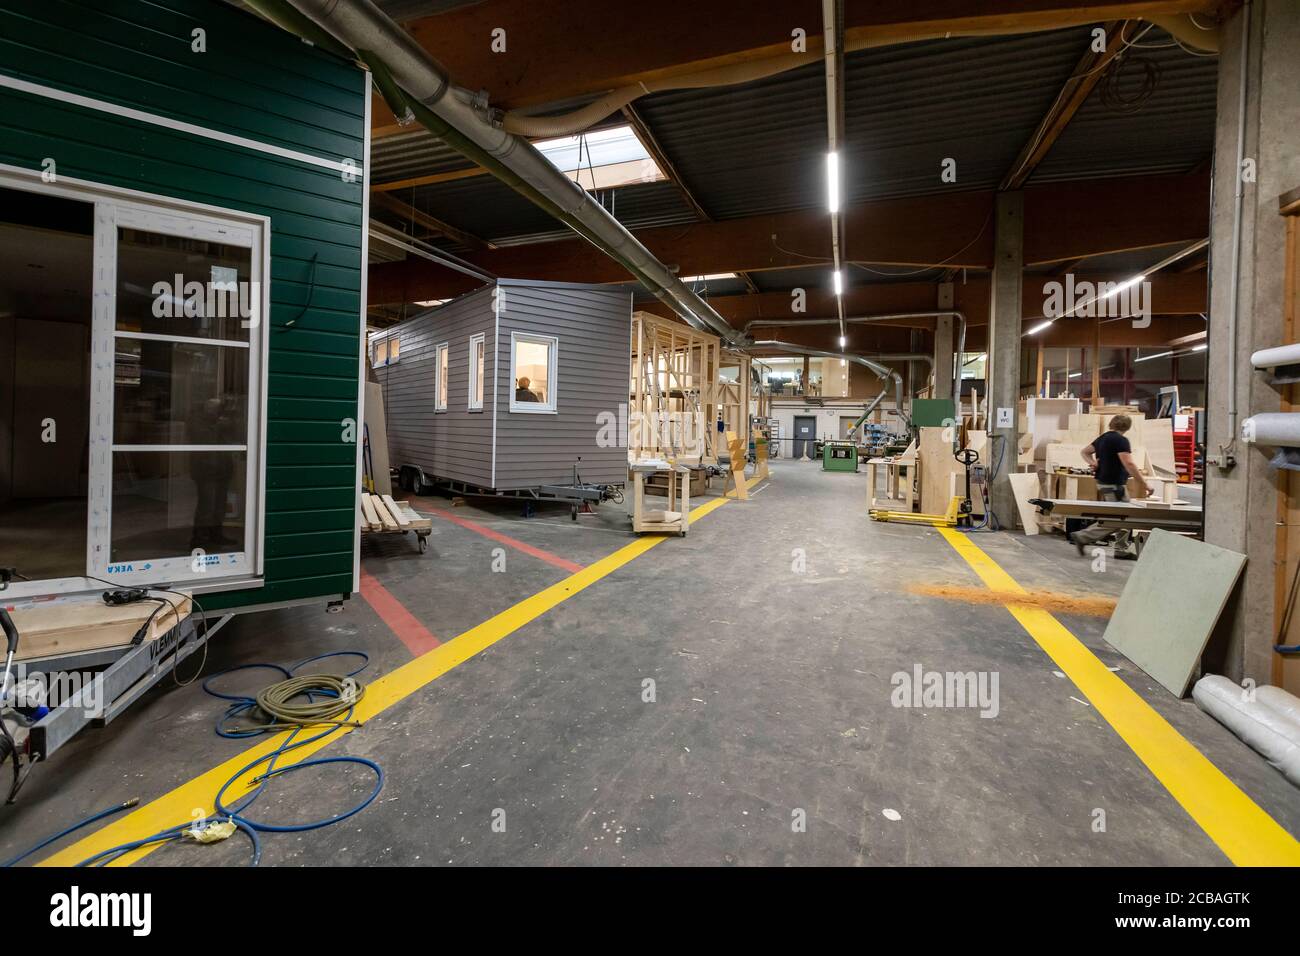 Tiny houses have been built in Stefan Diekmann's carpentry workshop in Hamm-Bockum-Hövel since 2015, when the boom in mini houses began. Different models are manufactured by the 40 employees. The Diekmann company is market leader. Stock Photo